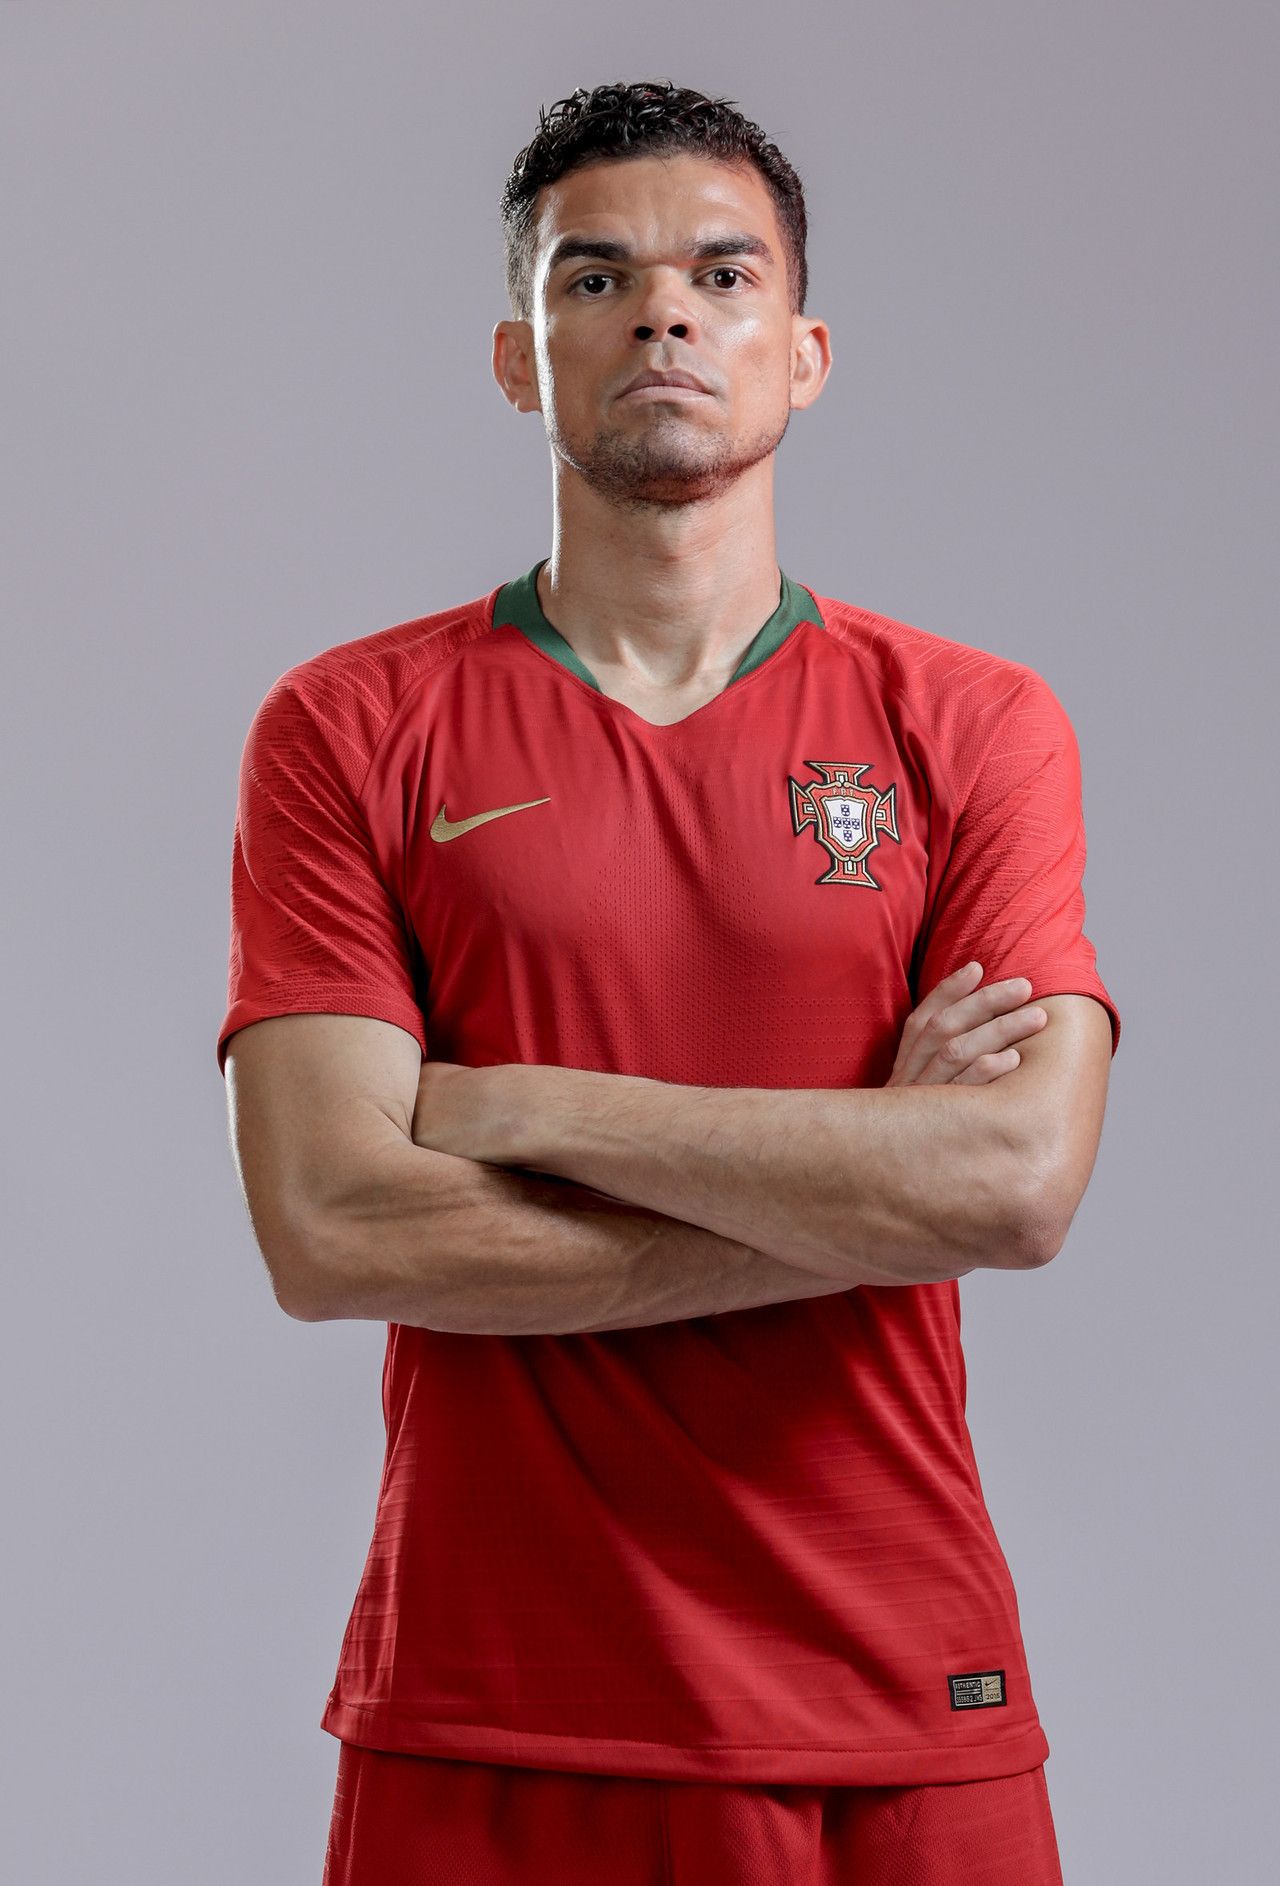 Portuguese footballer Pepe with the ball Desktop wallpapers 1920x1080